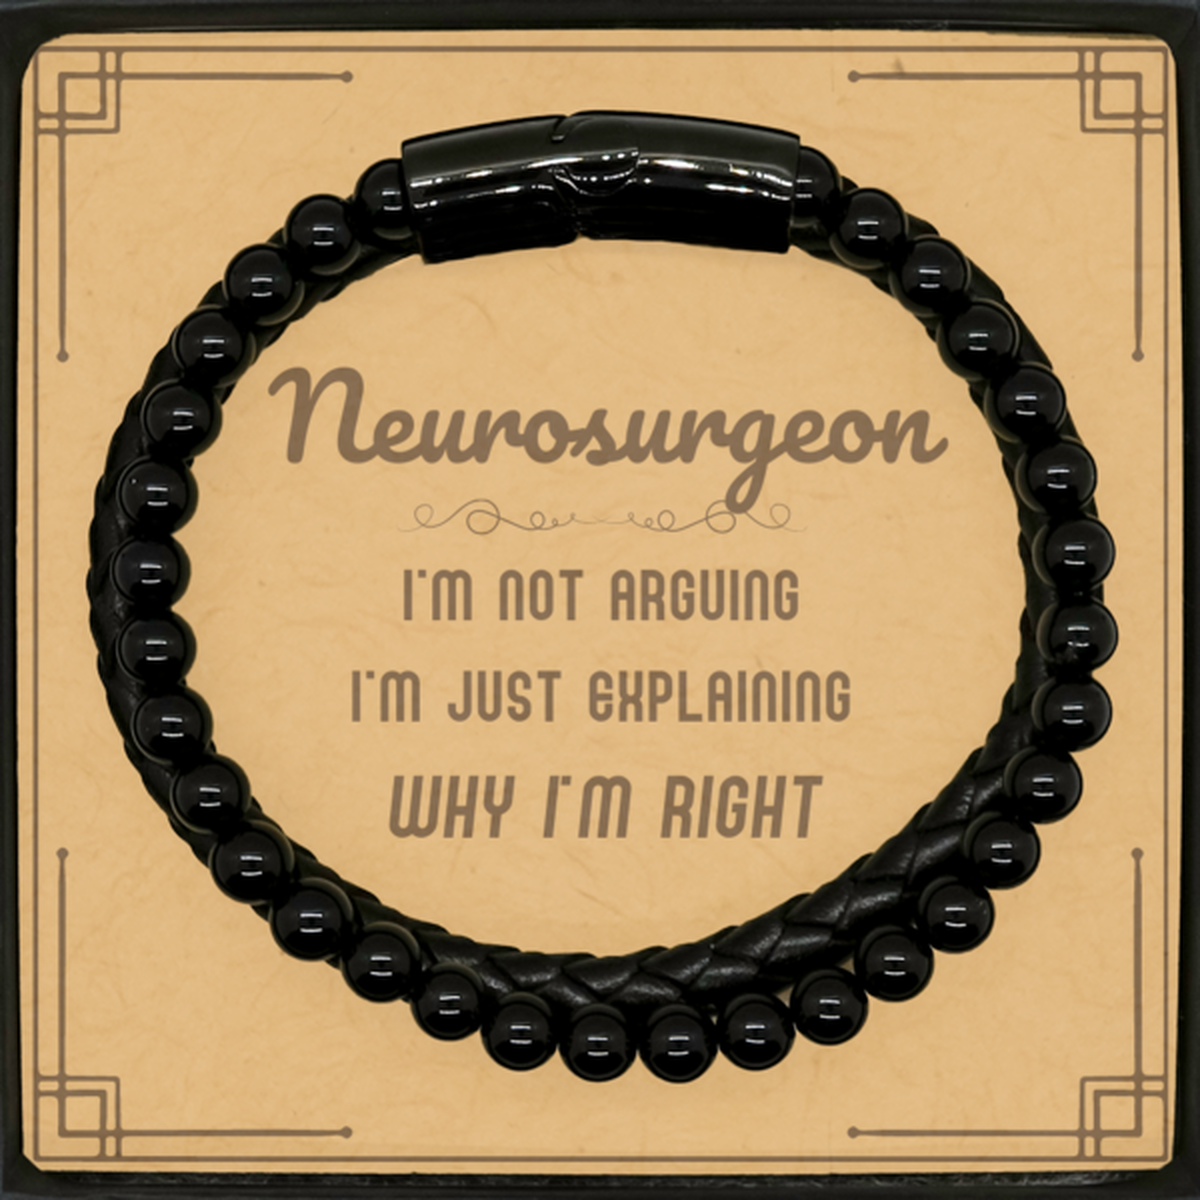 Neurosurgeon I'm not Arguing. I'm Just Explaining Why I'm RIGHT Stone Leather Bracelets, Funny Saying Quote Neurosurgeon Gifts For Neurosurgeon Message Card Graduation Birthday Christmas Gifts for Men Women Coworker